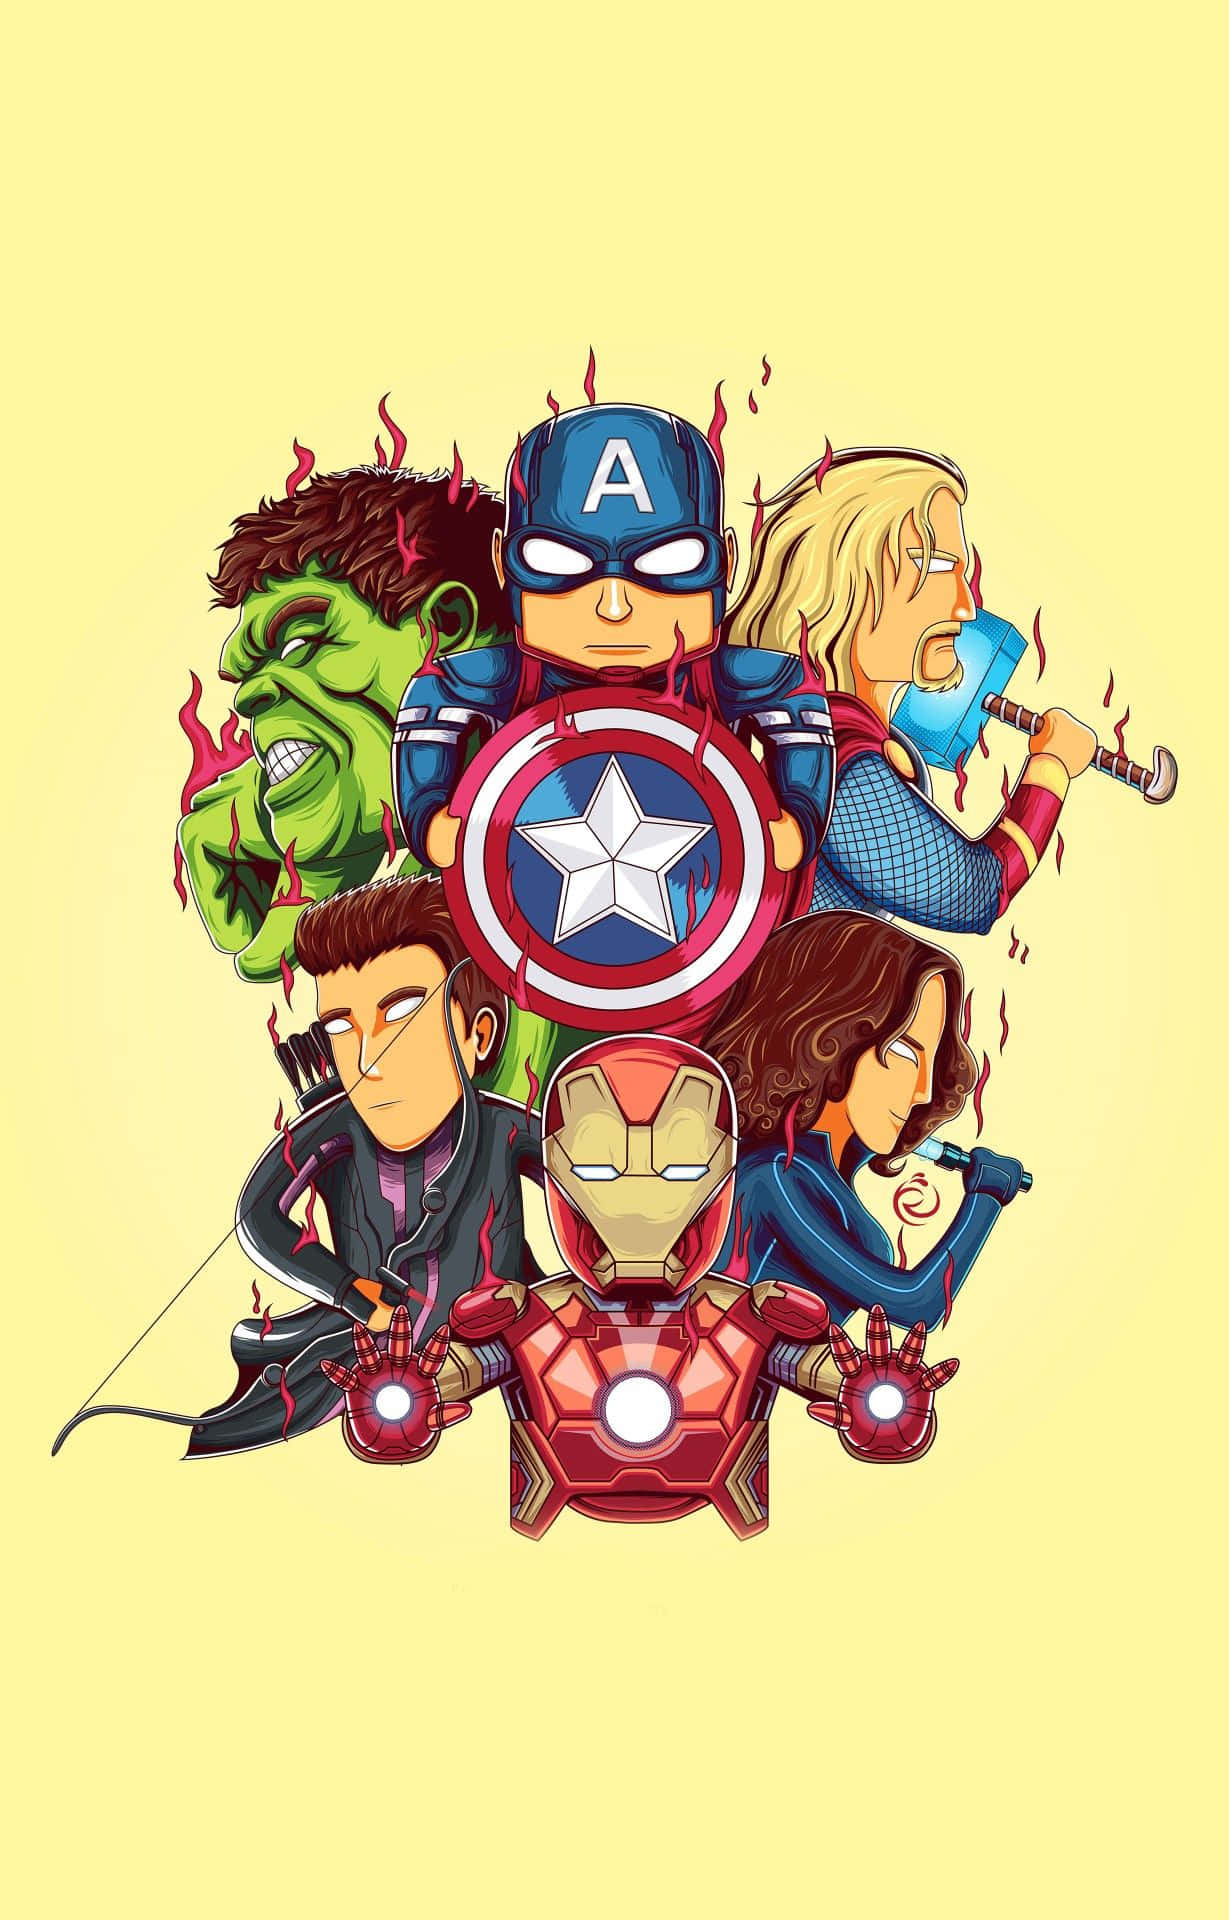 Pixel 3xl Marvel's Avengers Background In A Chibi Form 1229 x 1920 Background